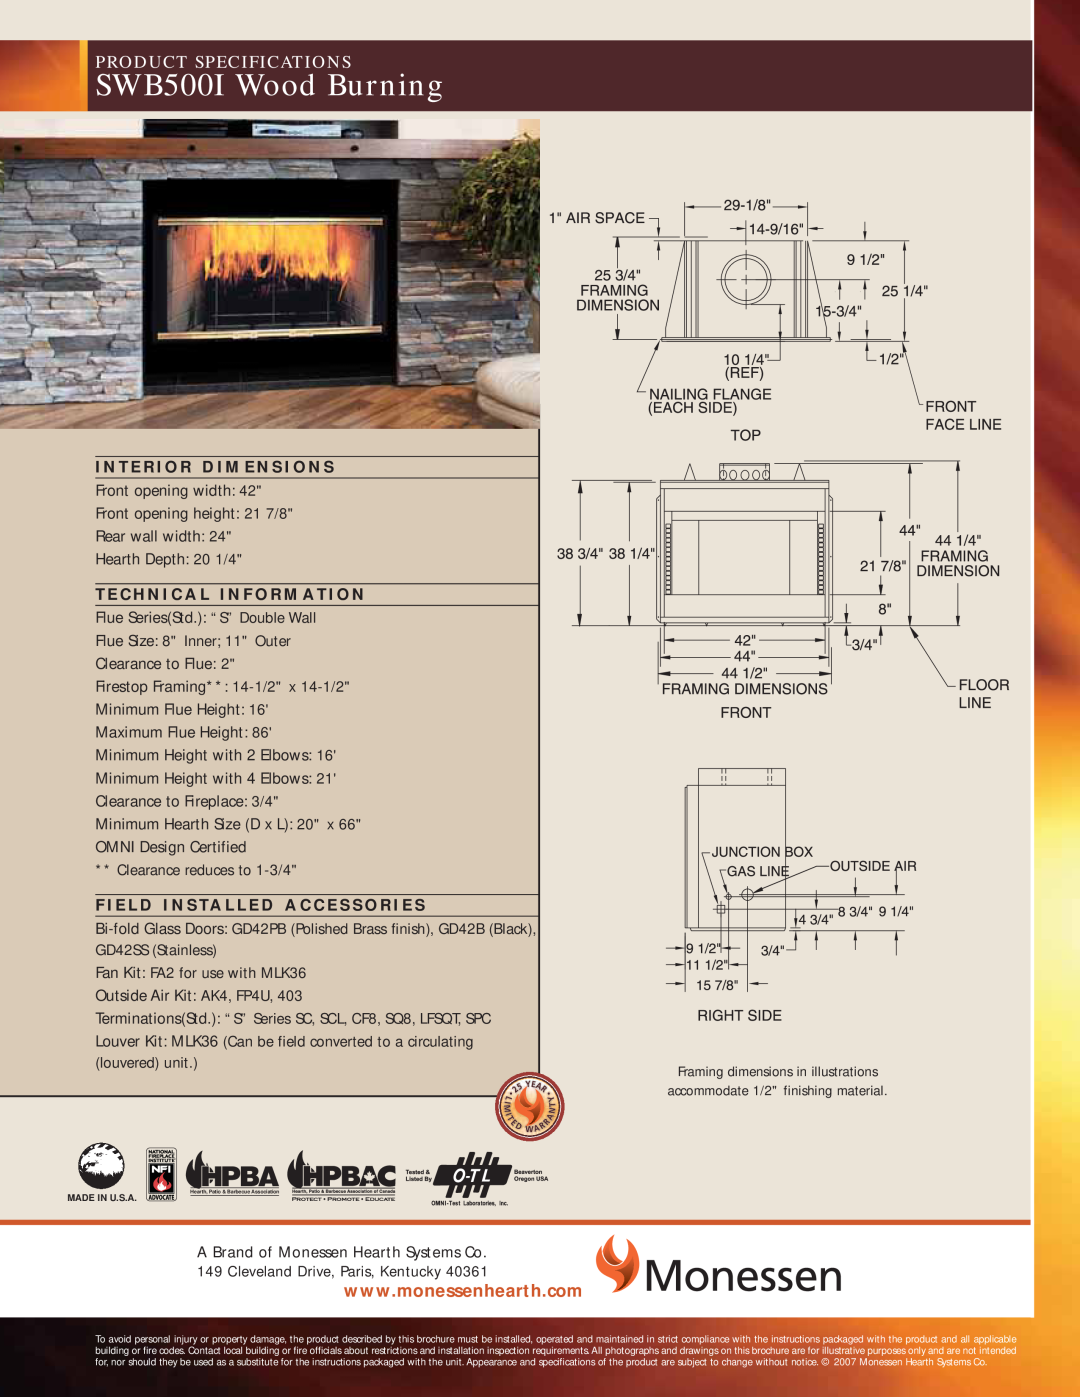 Monessen Hearth brochure SWB500I Wood Burning, Product Specifications 